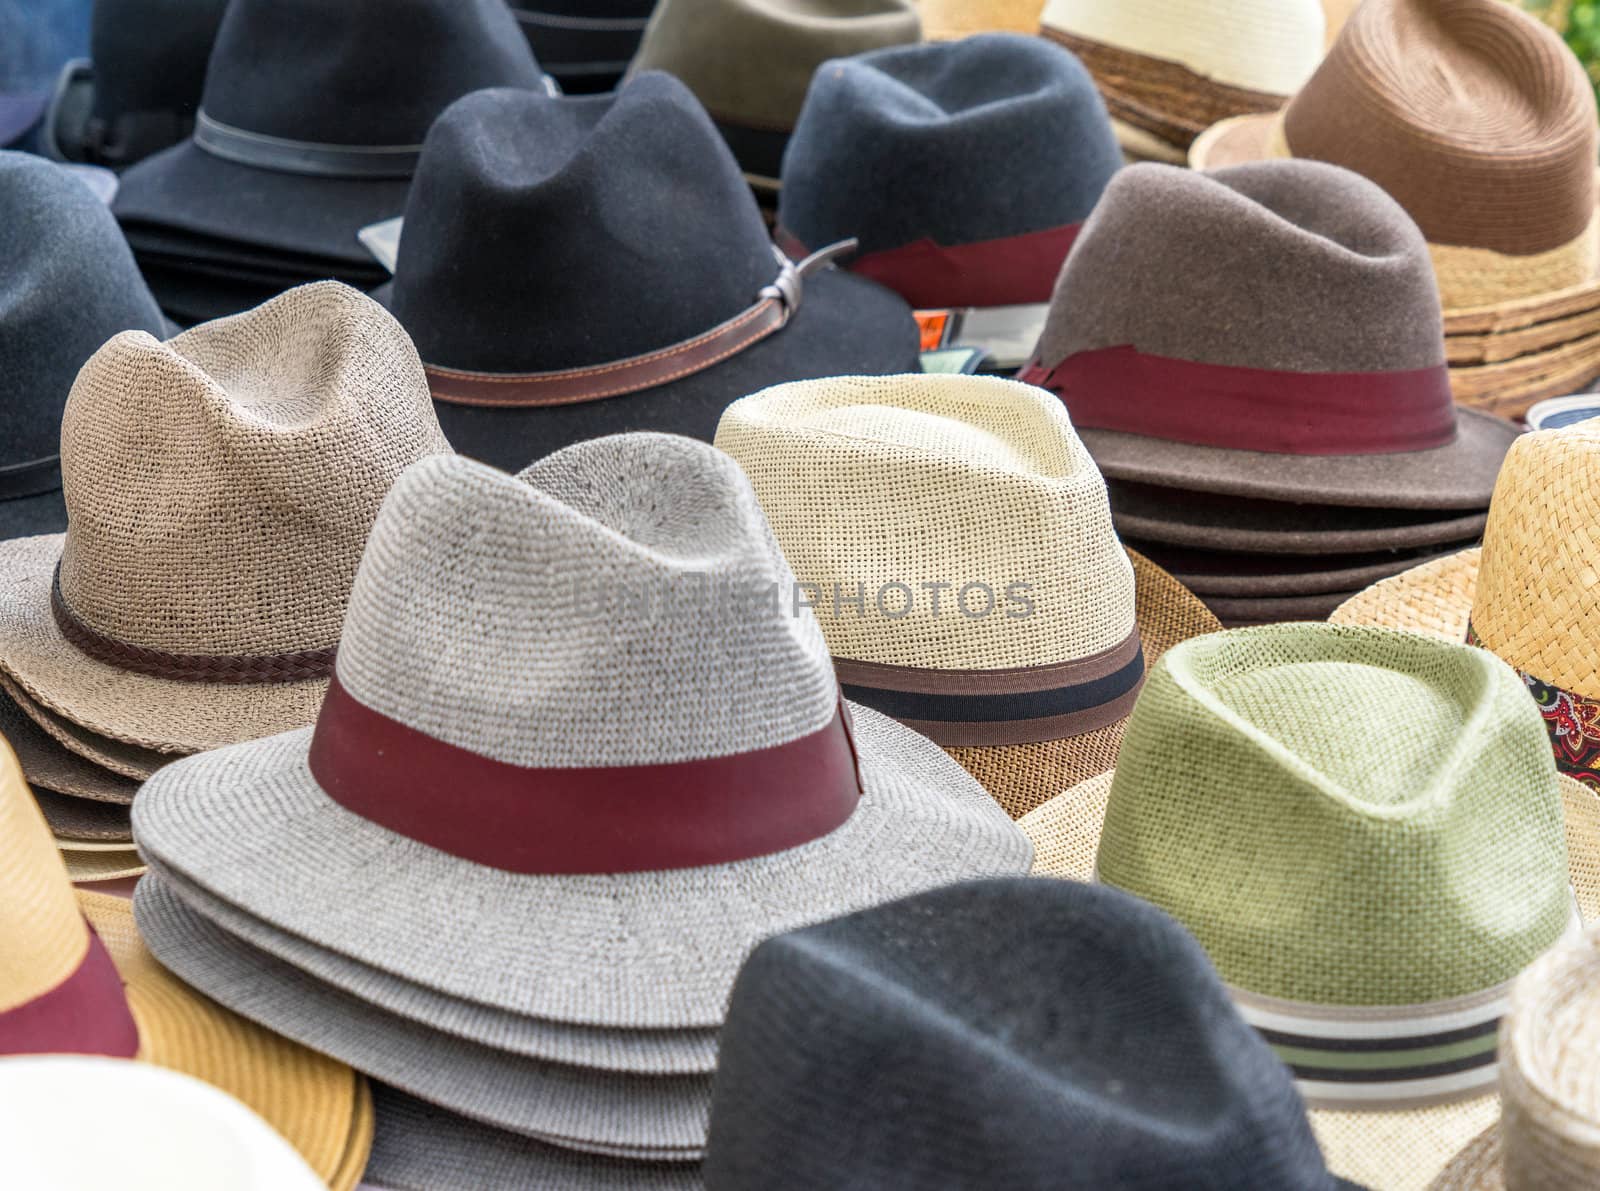 Many hats for men in different shapes and colors in one display for sale, germany